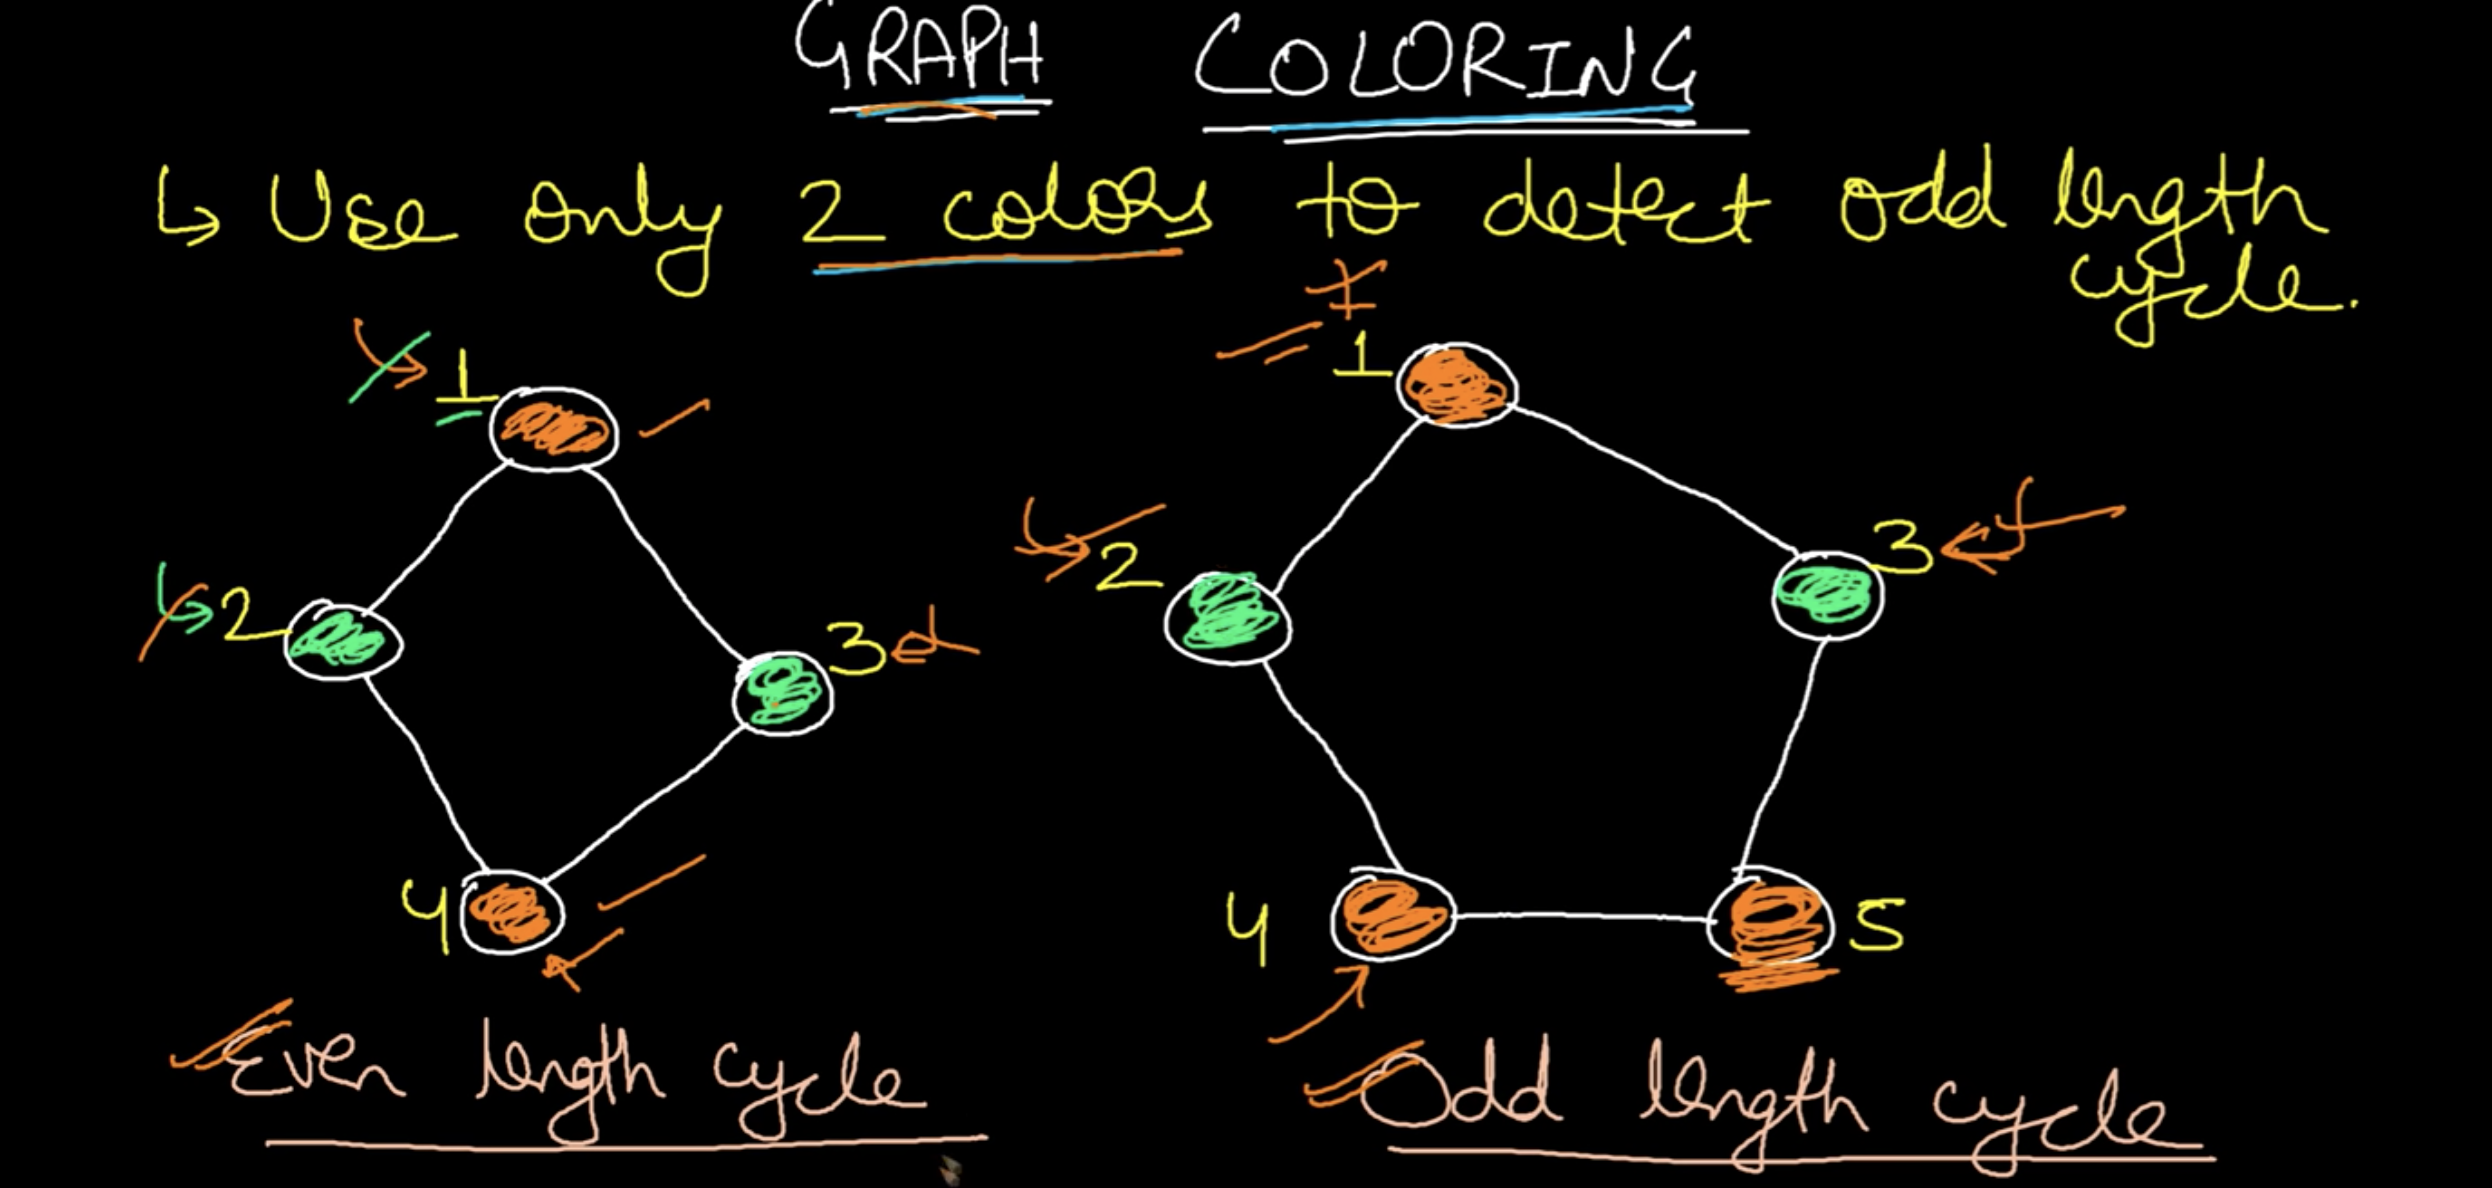 Graph colouring:
- the graph on the left has an even cycle
- the graph on the right failed to make an even cycle (at 4/5)